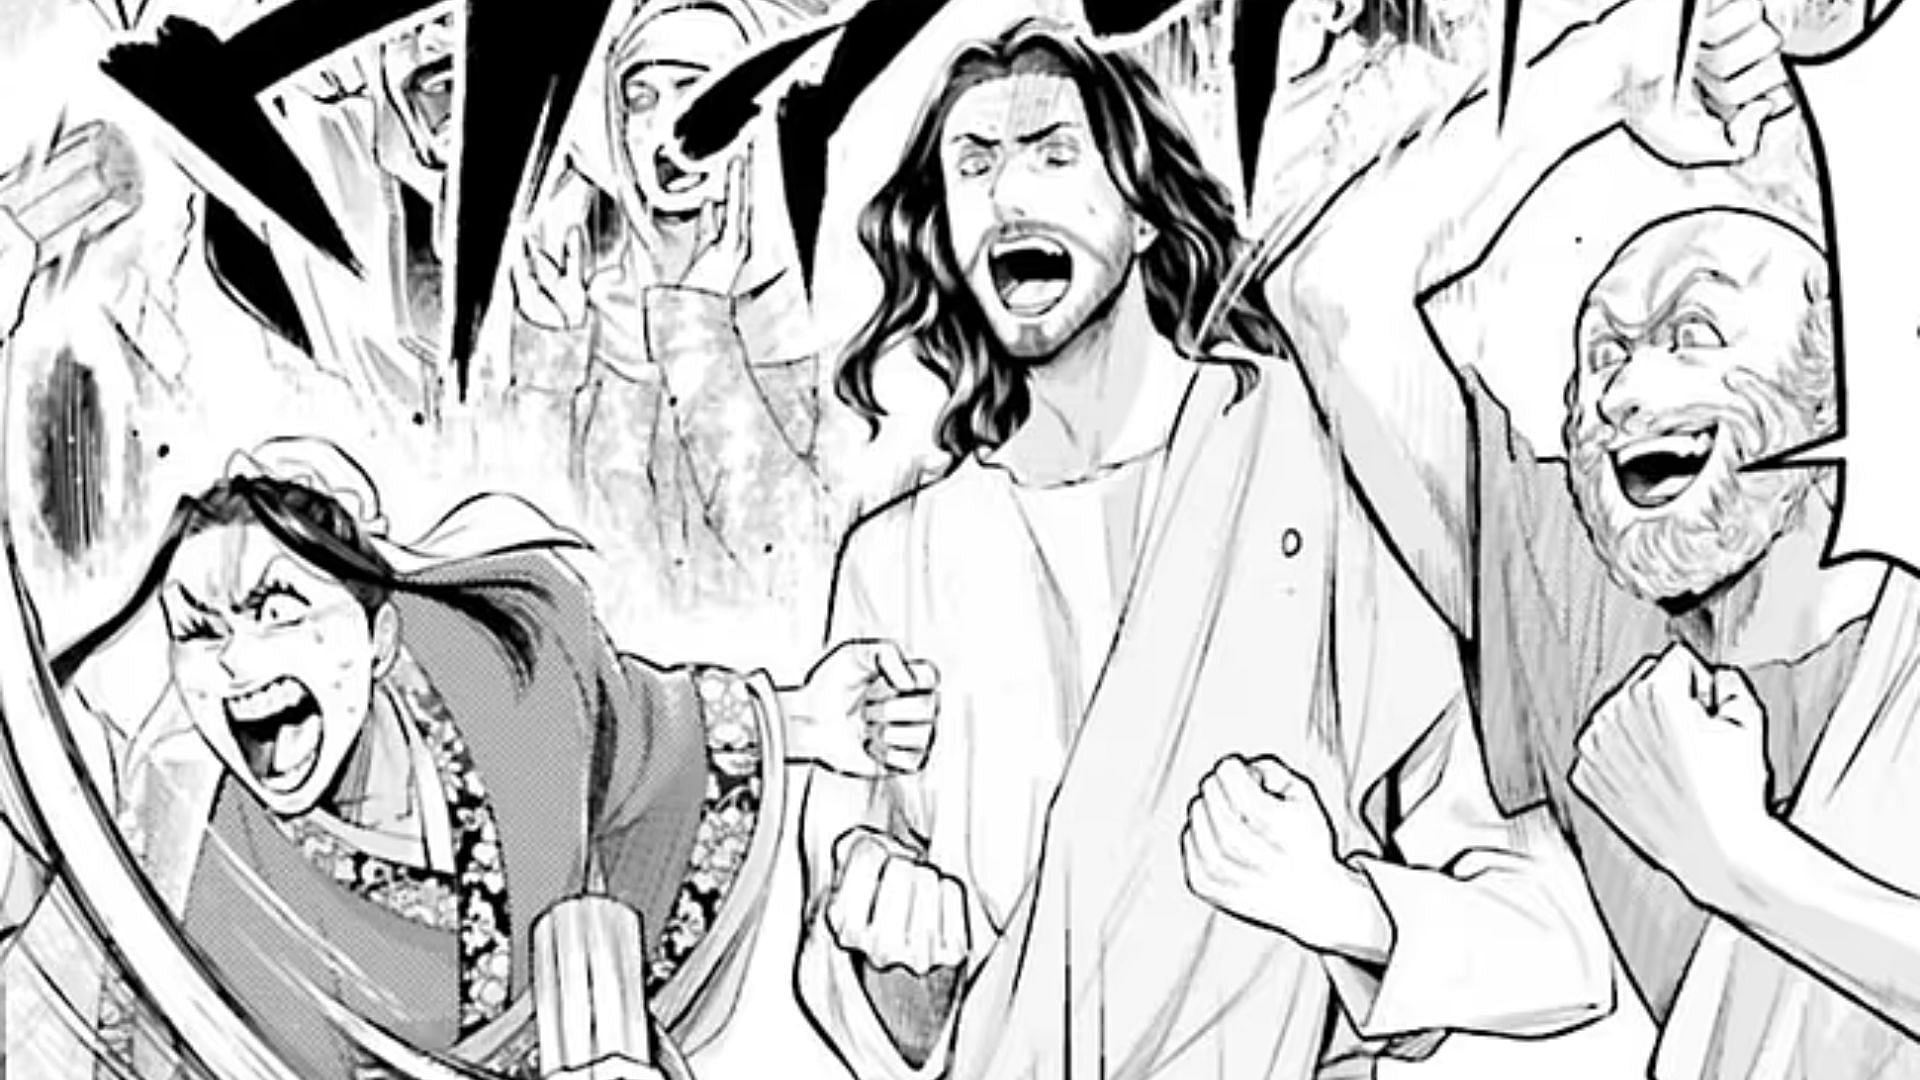 Four Sages: Jesus, Socrates, and Confucius as seen in Record of Ragnarok manga (Image via Monthly Comic Zenon)